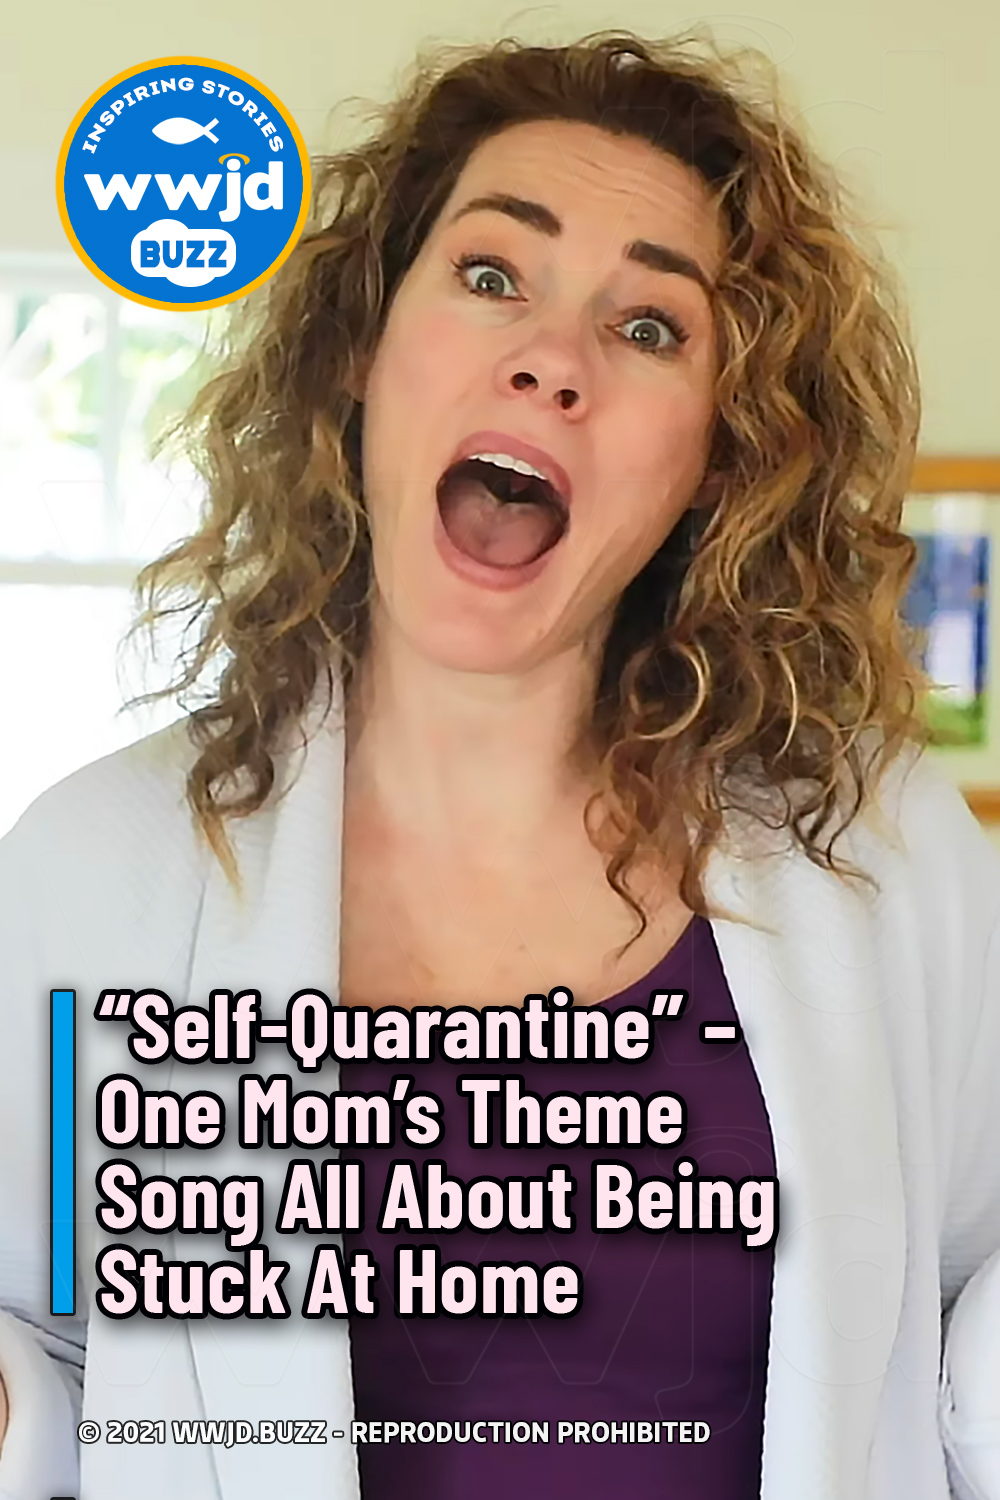 “Self-Quarantine” - One Mom’s Theme Song All About Being Stuck At Home